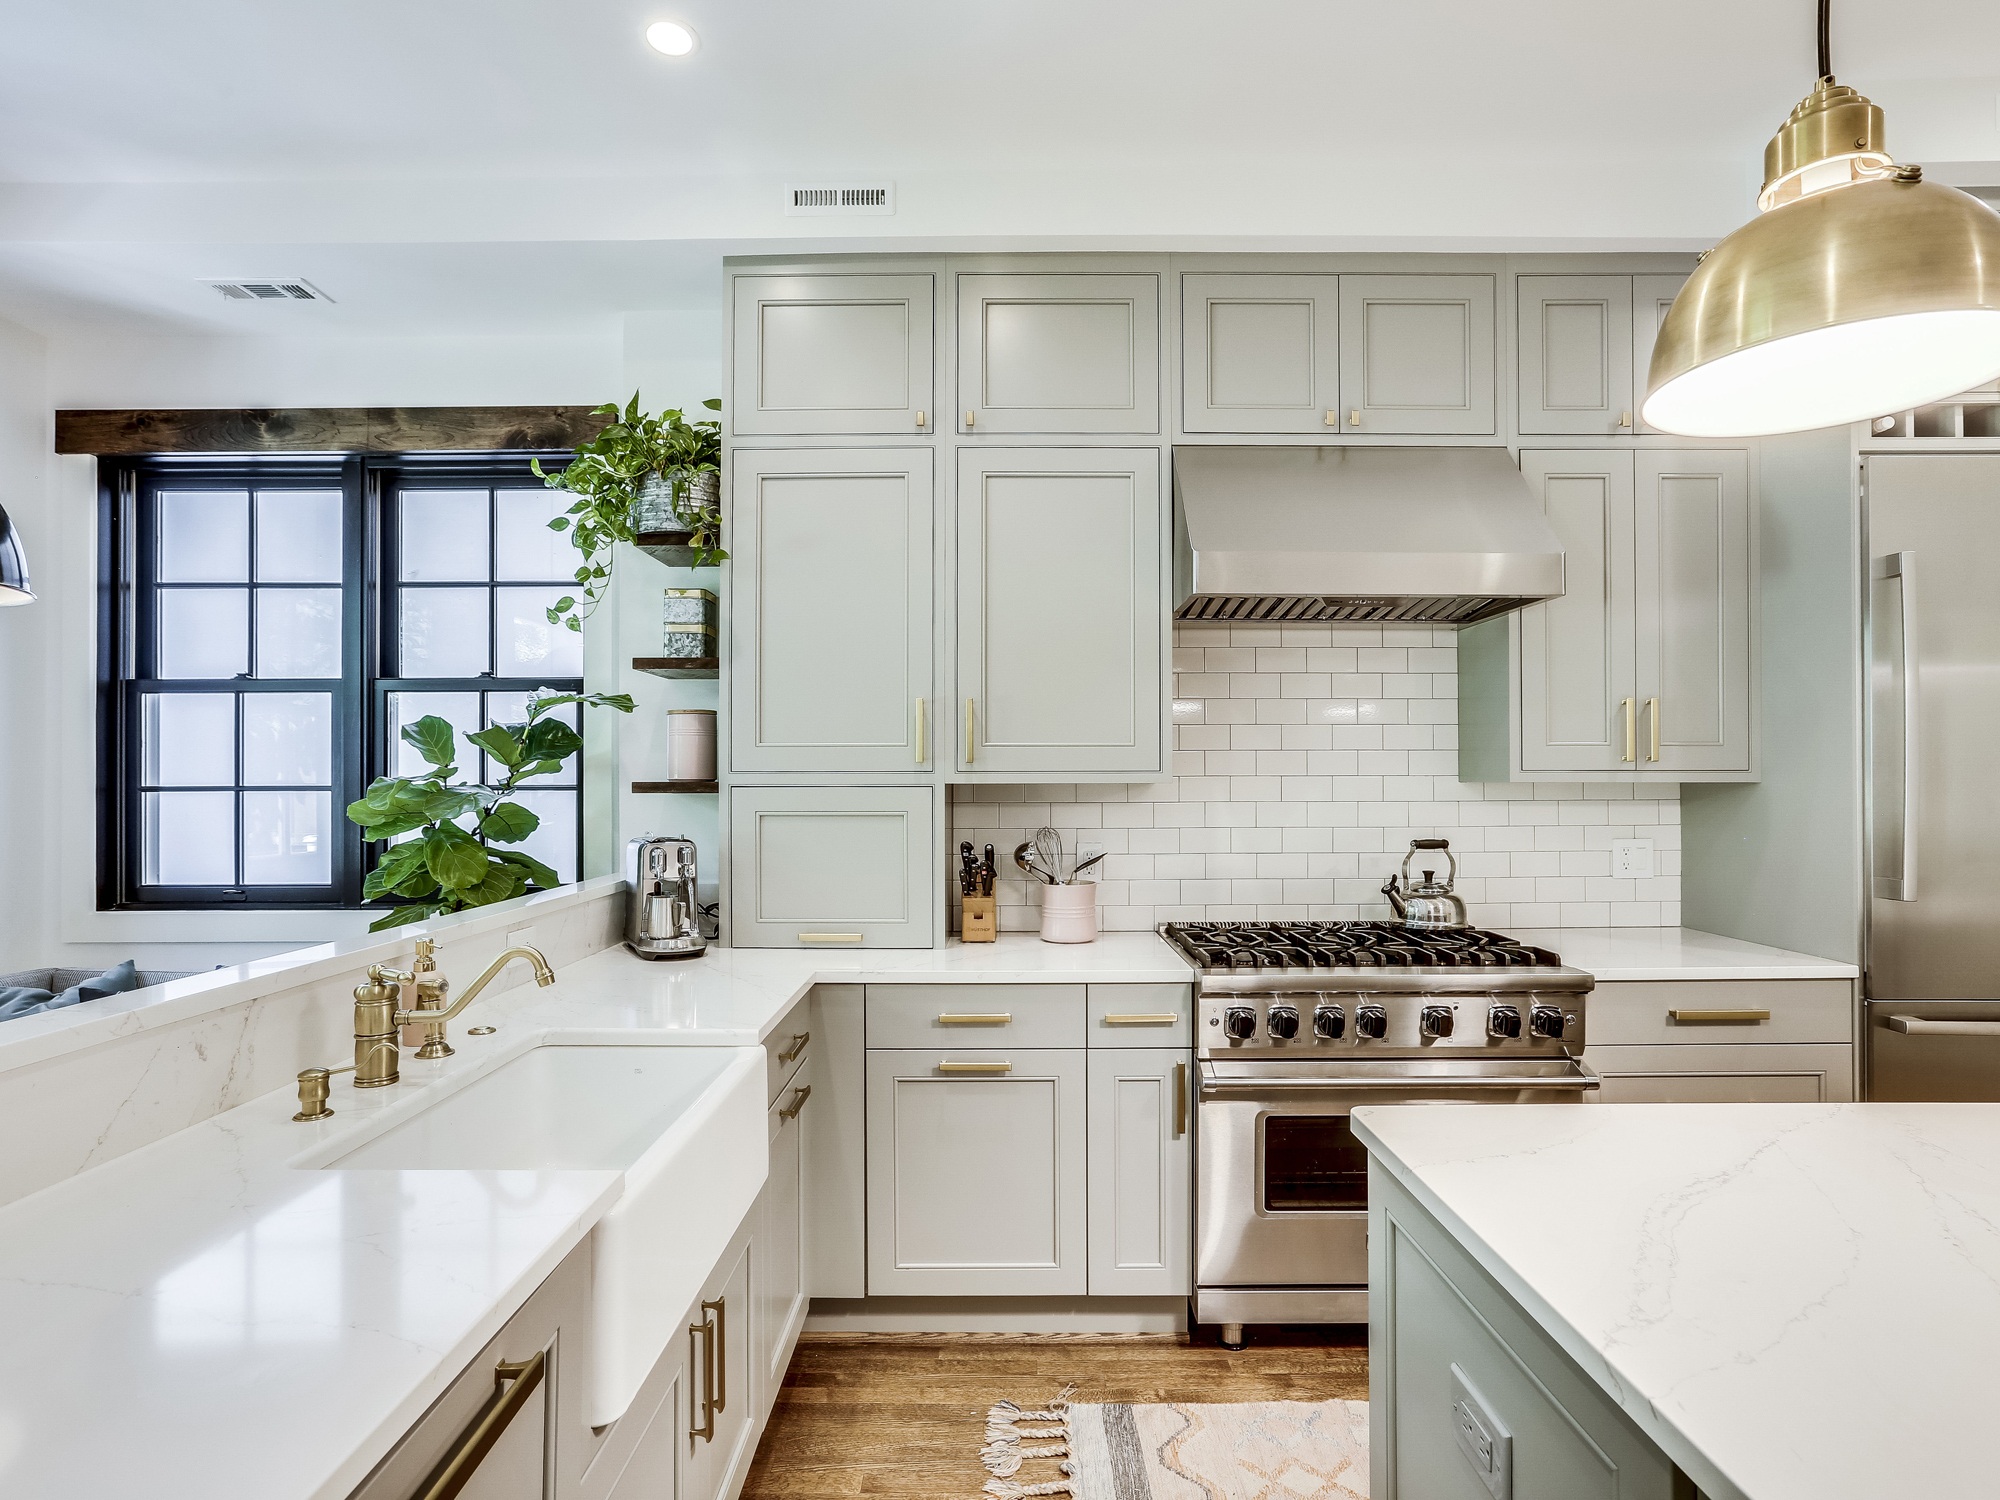 Designing Your home Made Easy With These Straightforward Suggestions BAI-Georgetown-DC-CDB-kitchen-remodel-with-rear-bump-out18JUL-BTW-BOWA-nw_washington_dc-35-14